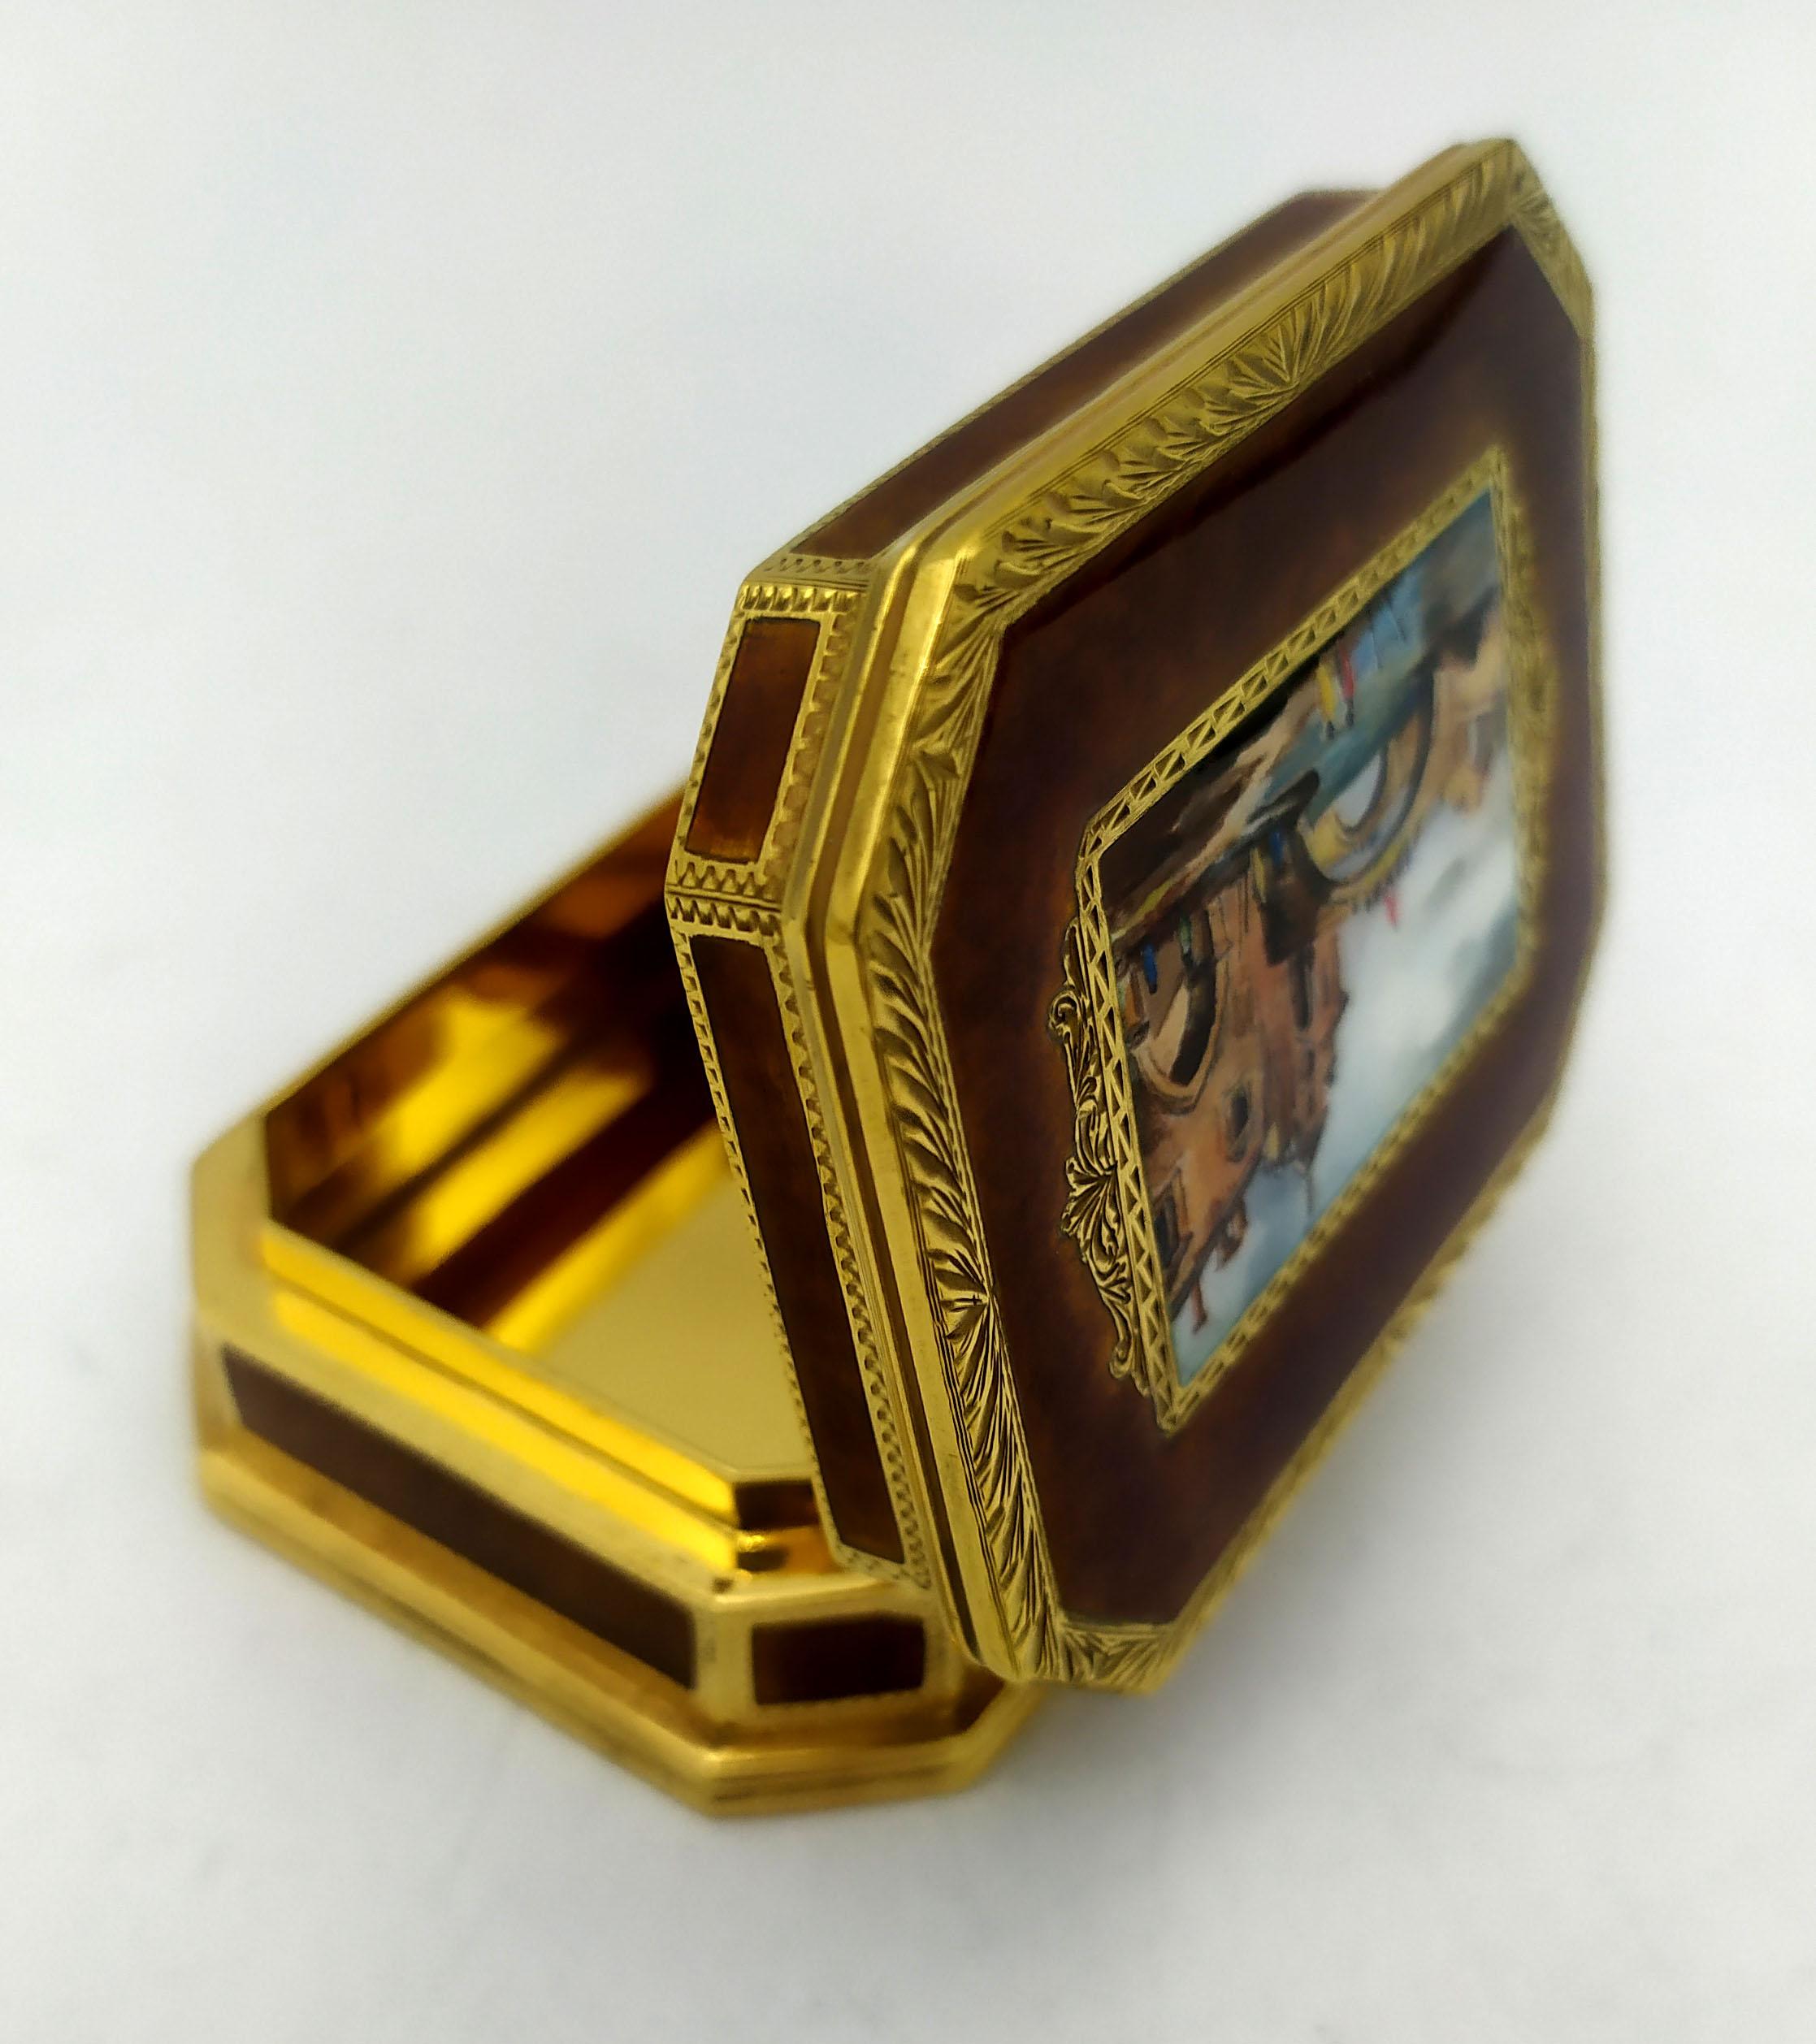 Octagonal snuffbox in 925/1000 sterling silver gold plated with English Queen Anne style borders and sides with translucent fired enamel on hand engraving similar to wood grain. On the lid, a very fine fire-enameled miniature hand-painted by the